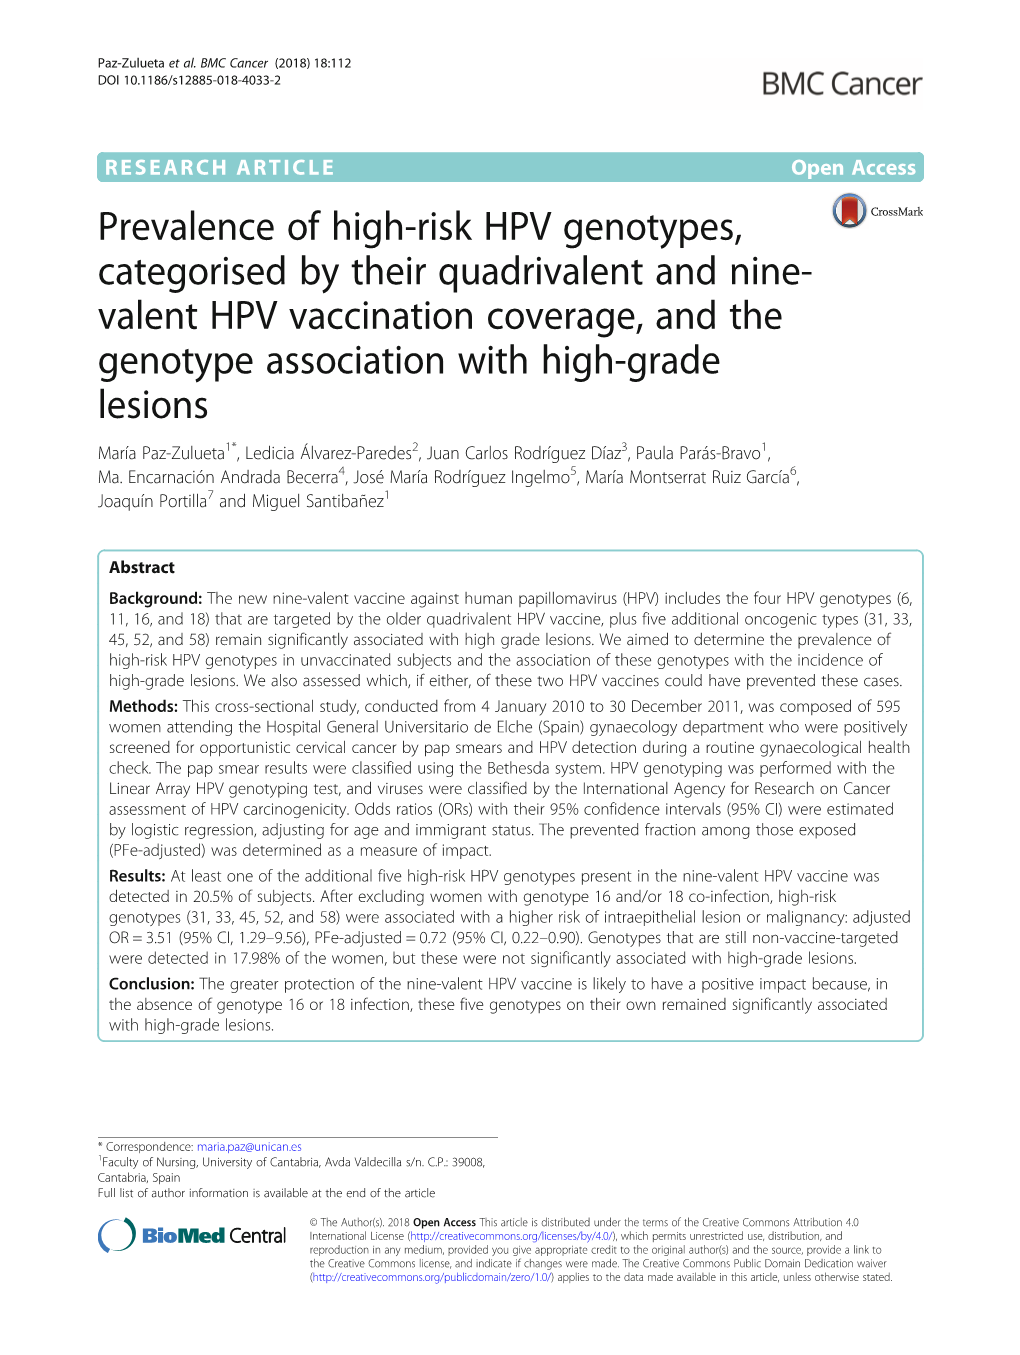 Valent HPV Vaccination Coverage, and the Genotype Association with High